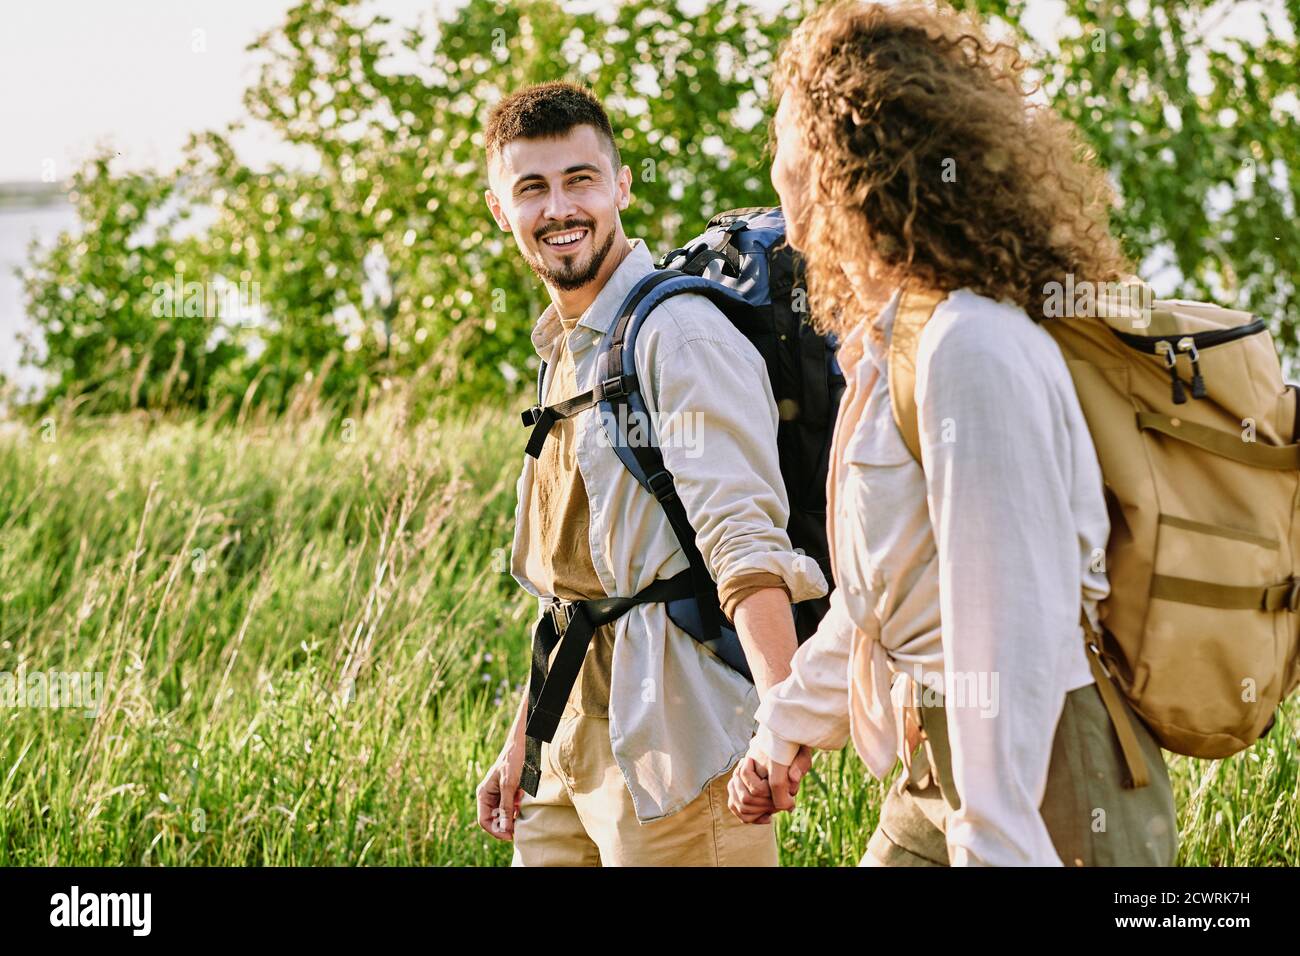 Positive young couple with backpacks holding hands and looking at each other while enjoying hike in country Stock Photo